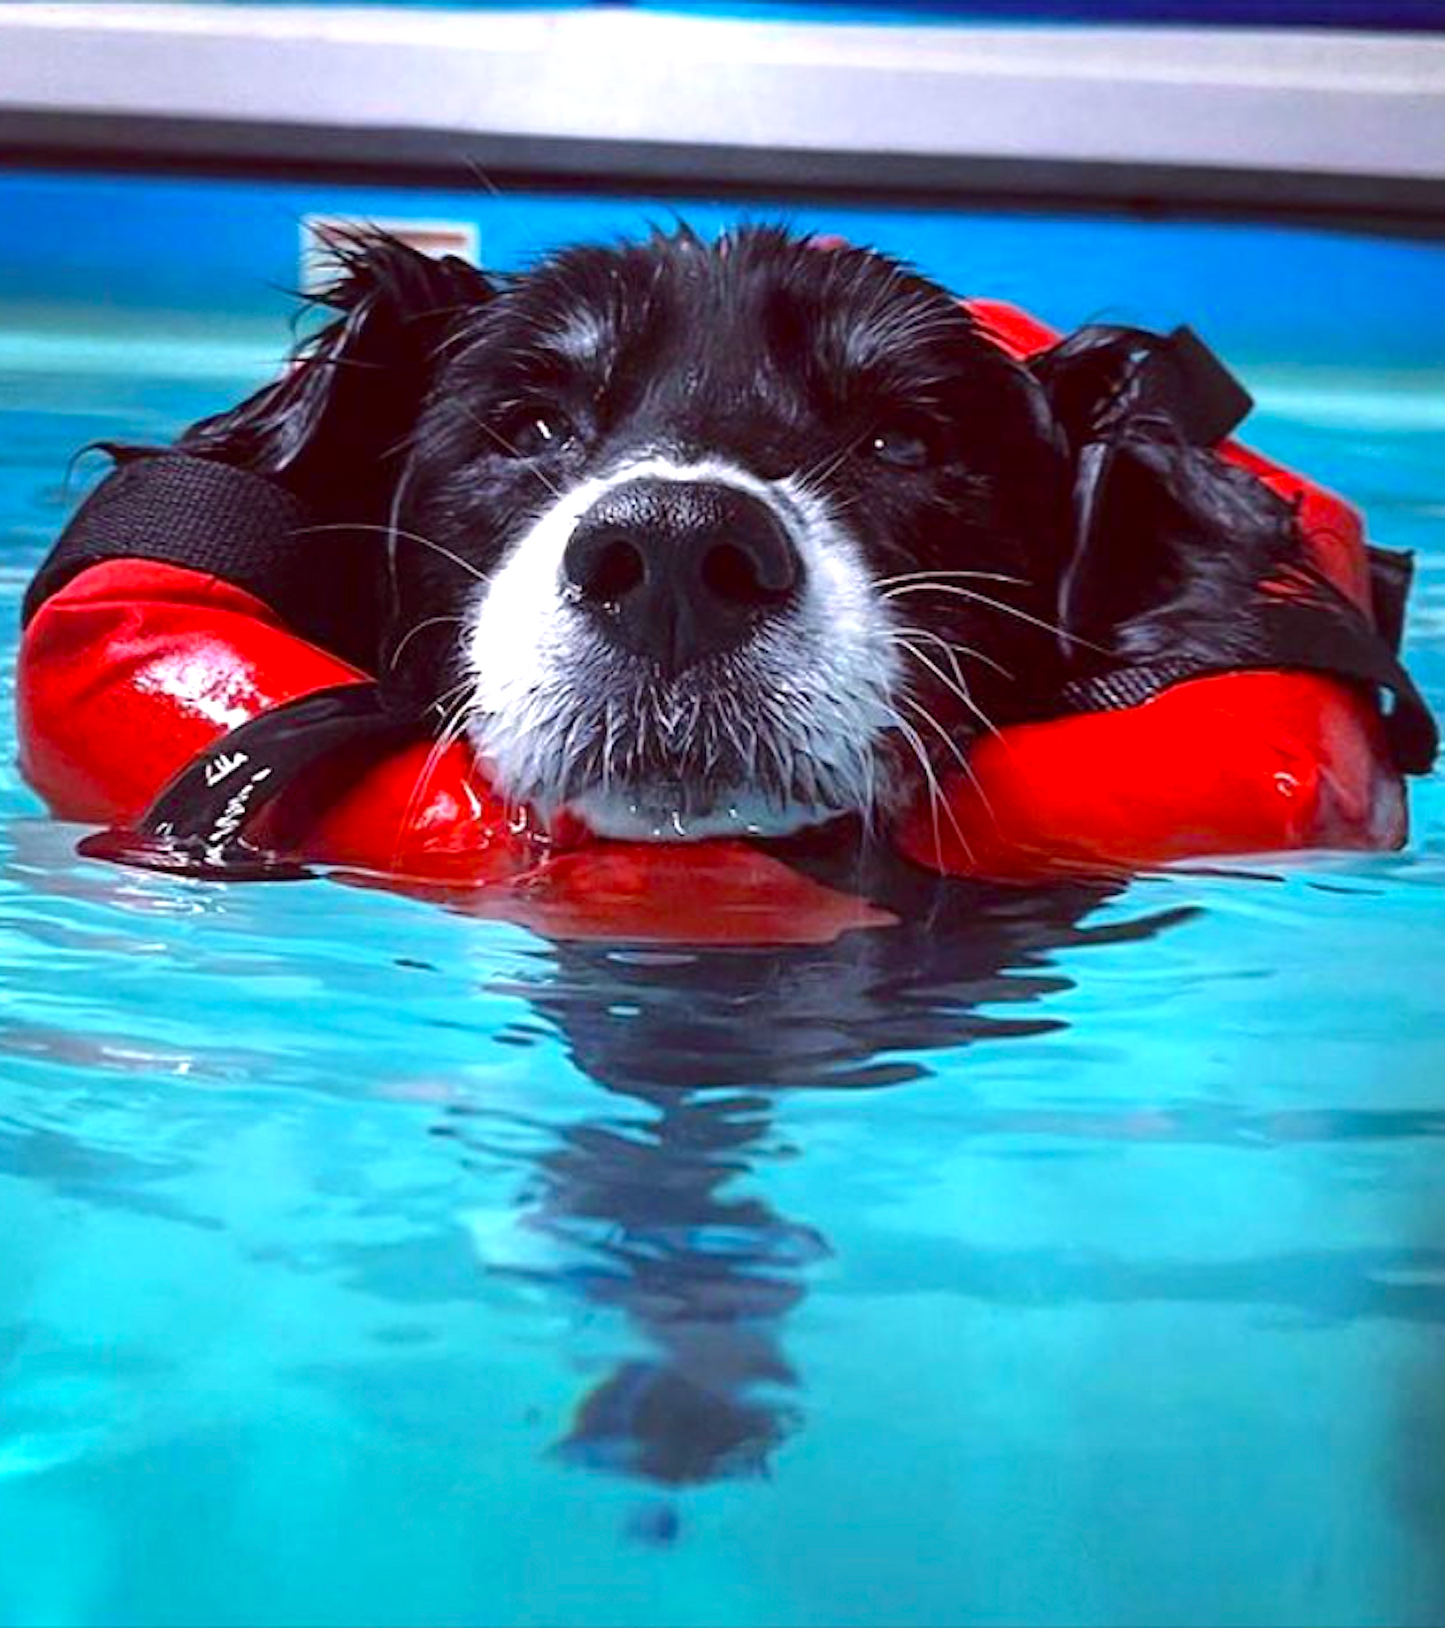 HEDZ UP DOG FLOTATION DEVICE: keeping our dogs' noses up keeps them safe